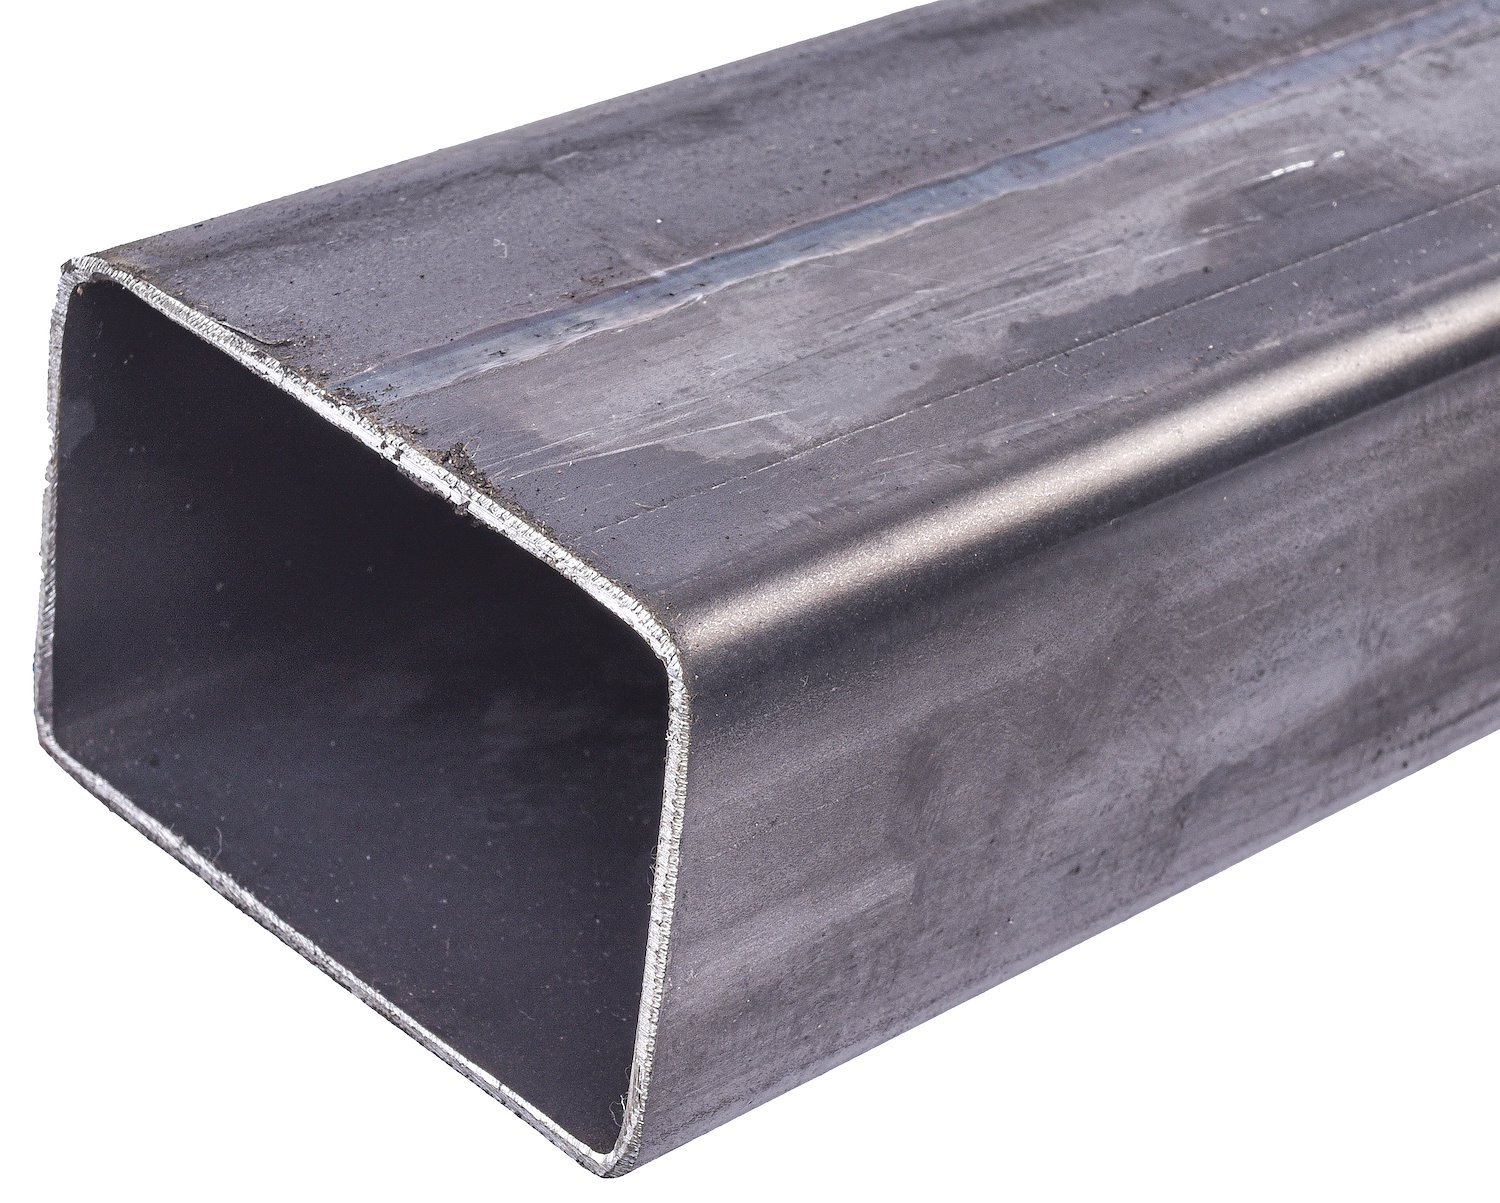 Mild Steel Tubing [Rectangular, 2 in. Height x 3 in. Width x 0.083 in. Thickness x 4 ft. Length]